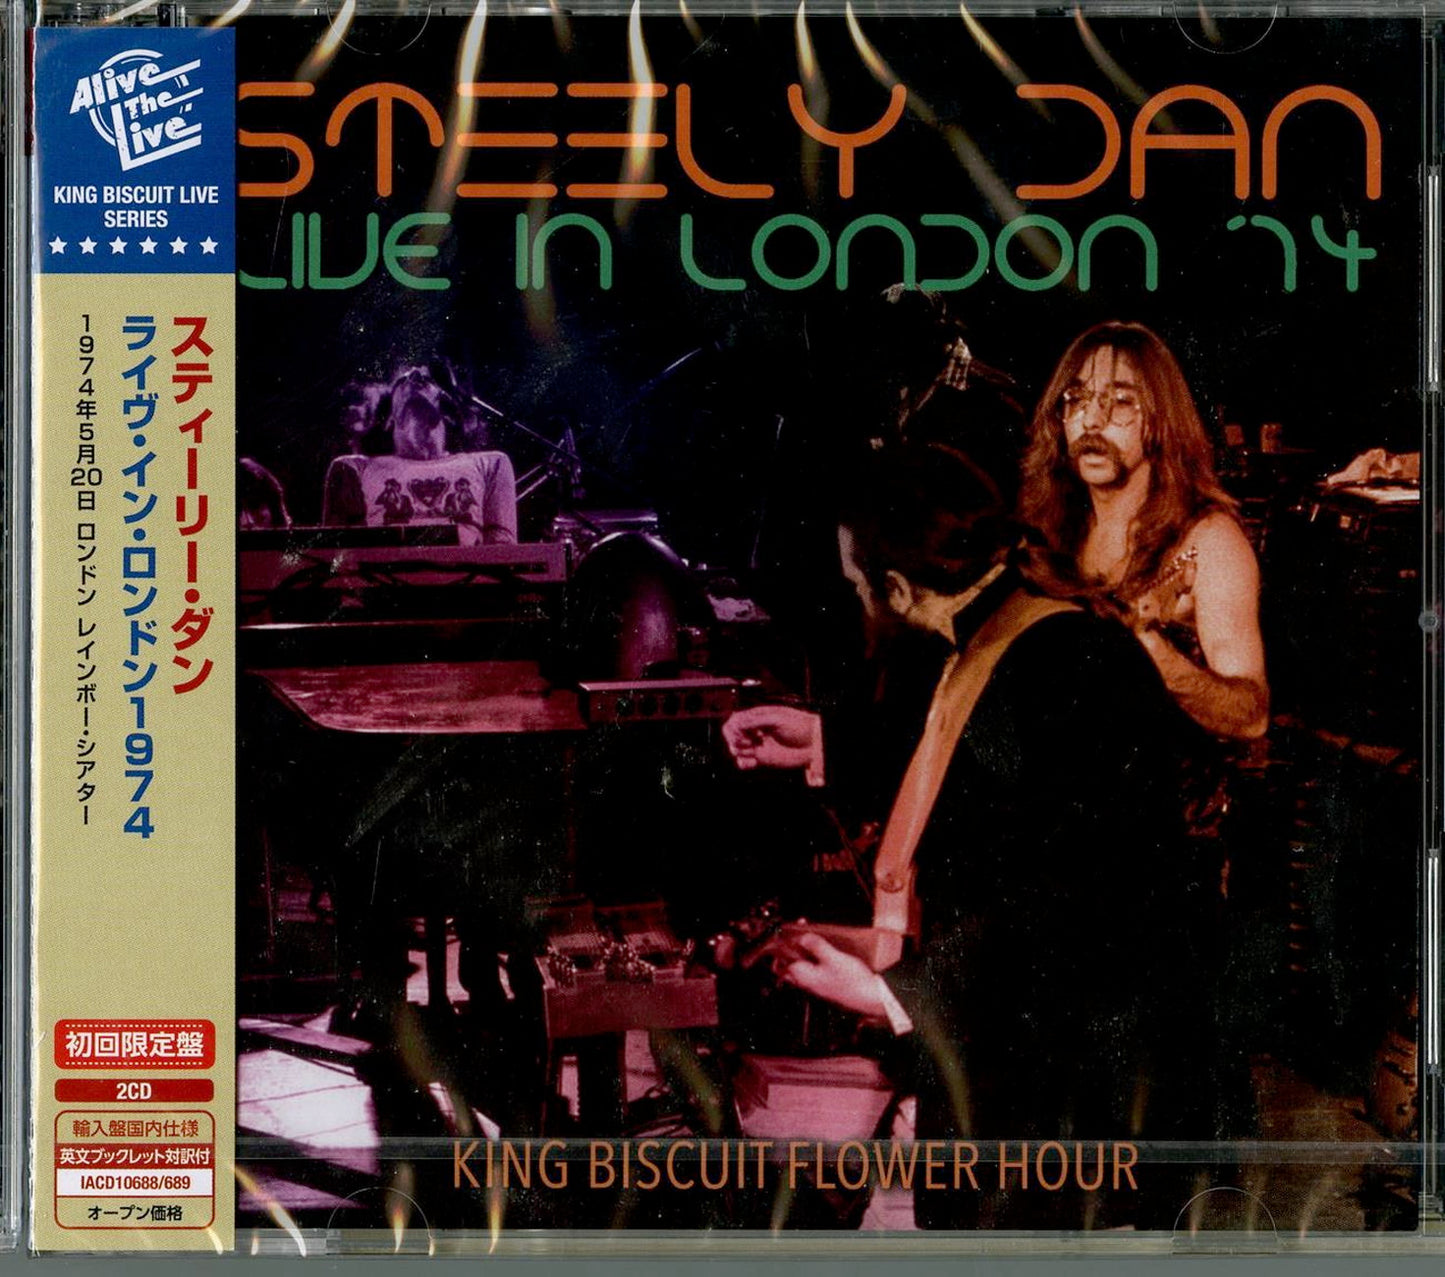 Steely Dan - Live In London '74 King Biscuit Flower Hour - Import 2 CD